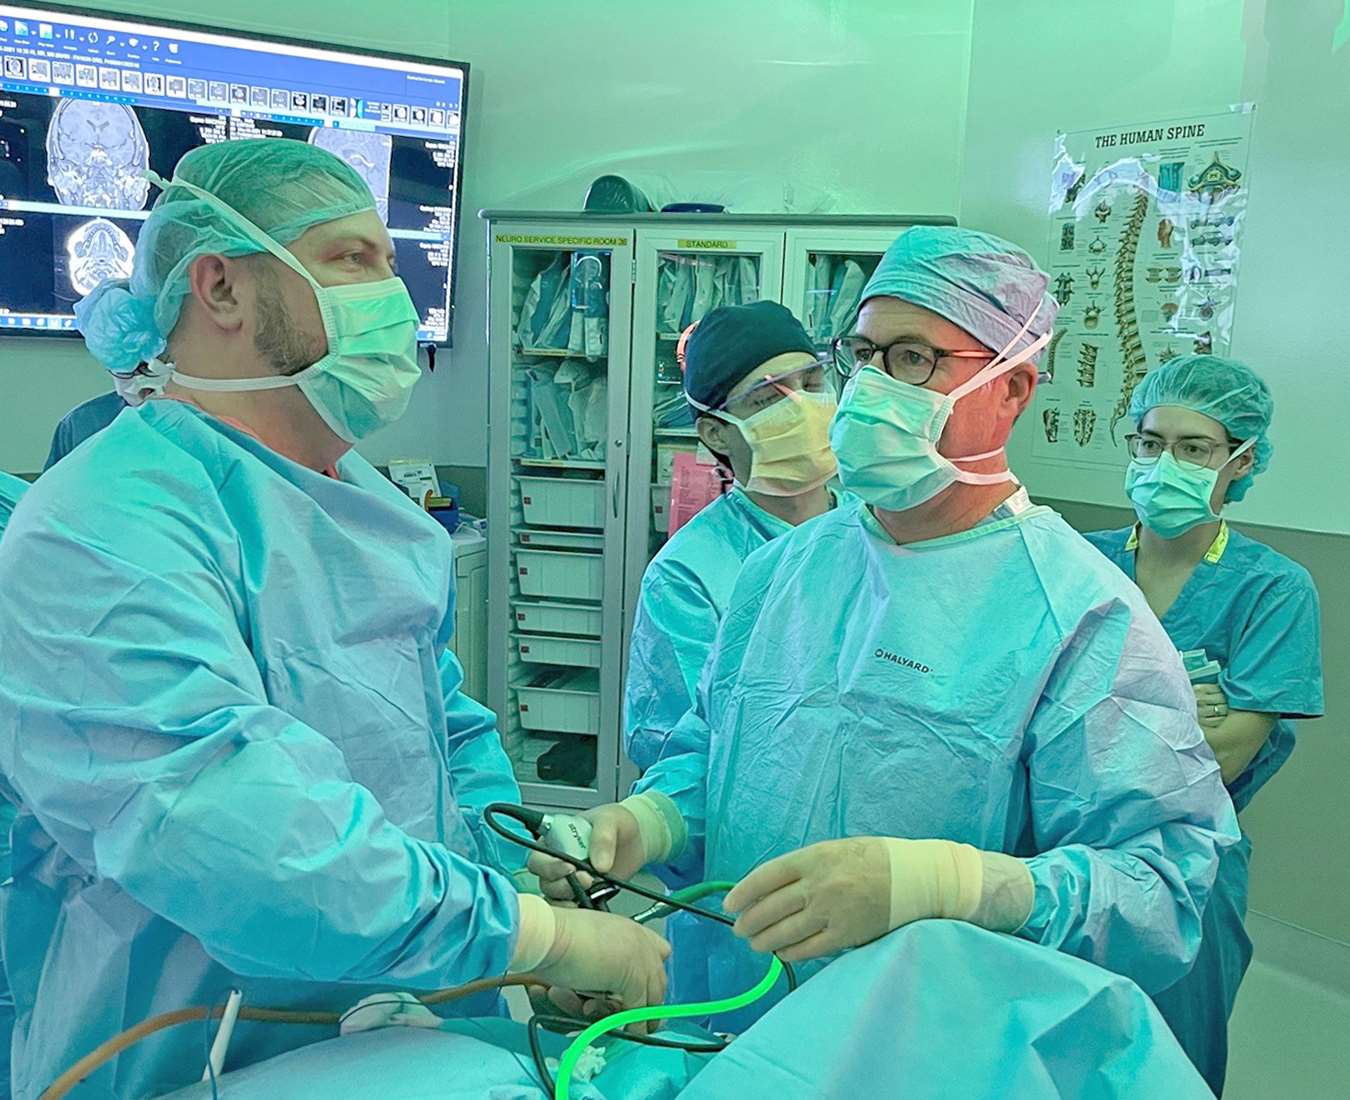 A new key to brain surgery